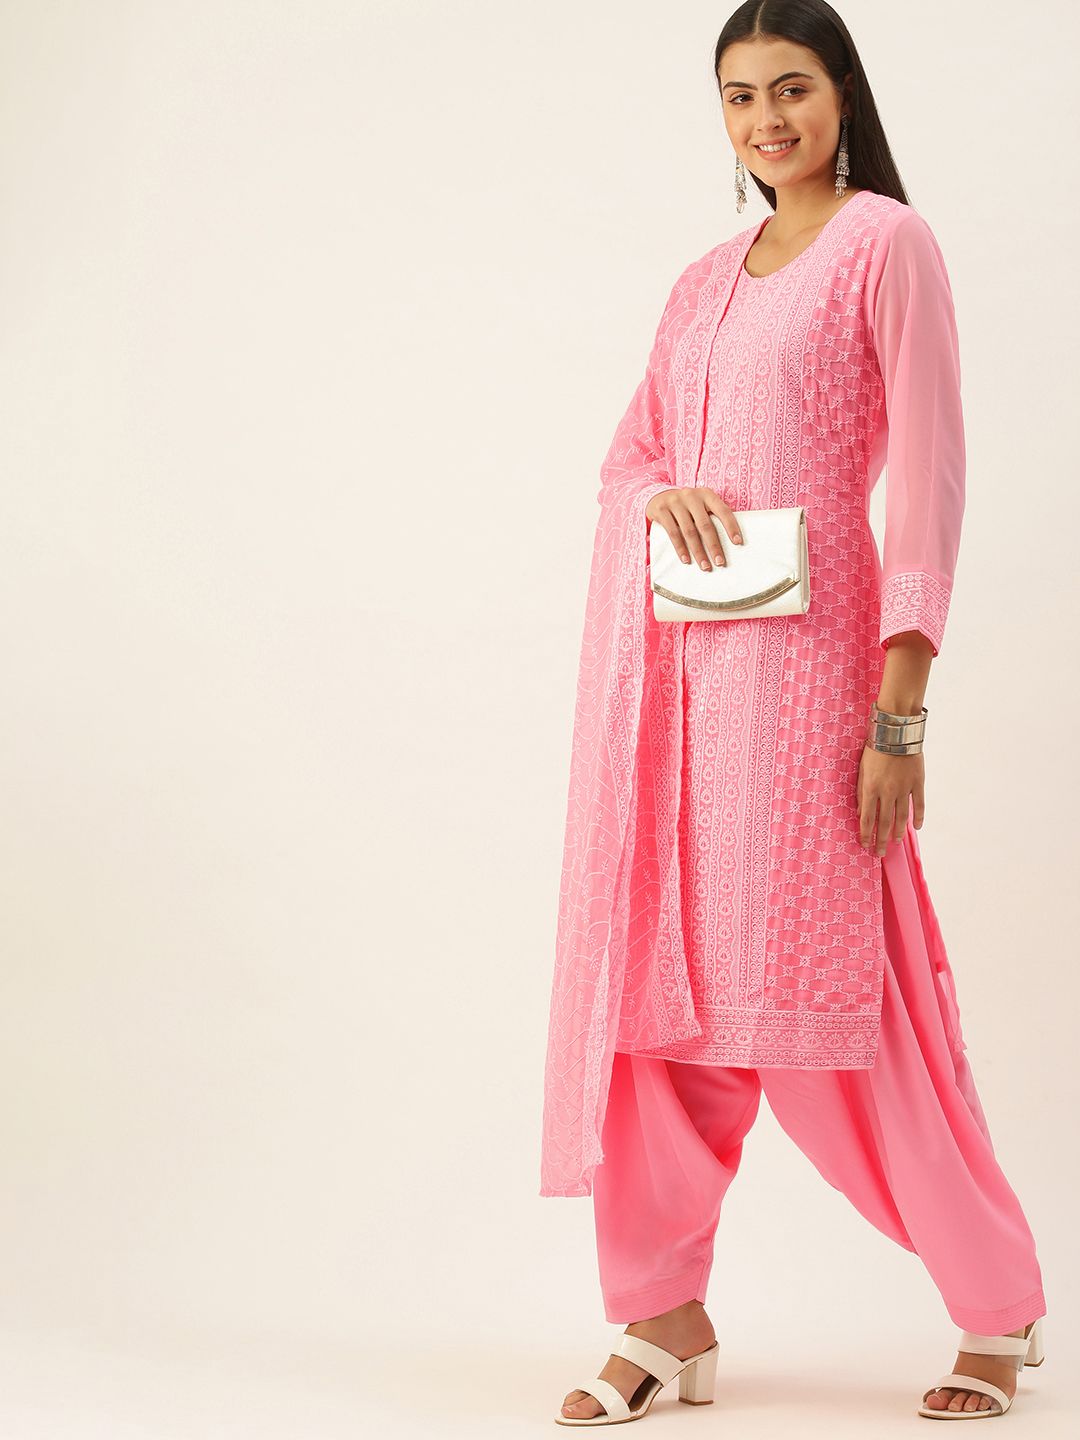 SWAGG INDIA Pink Ethnic Motif Embroidered Unstitched Dress Material Price in India